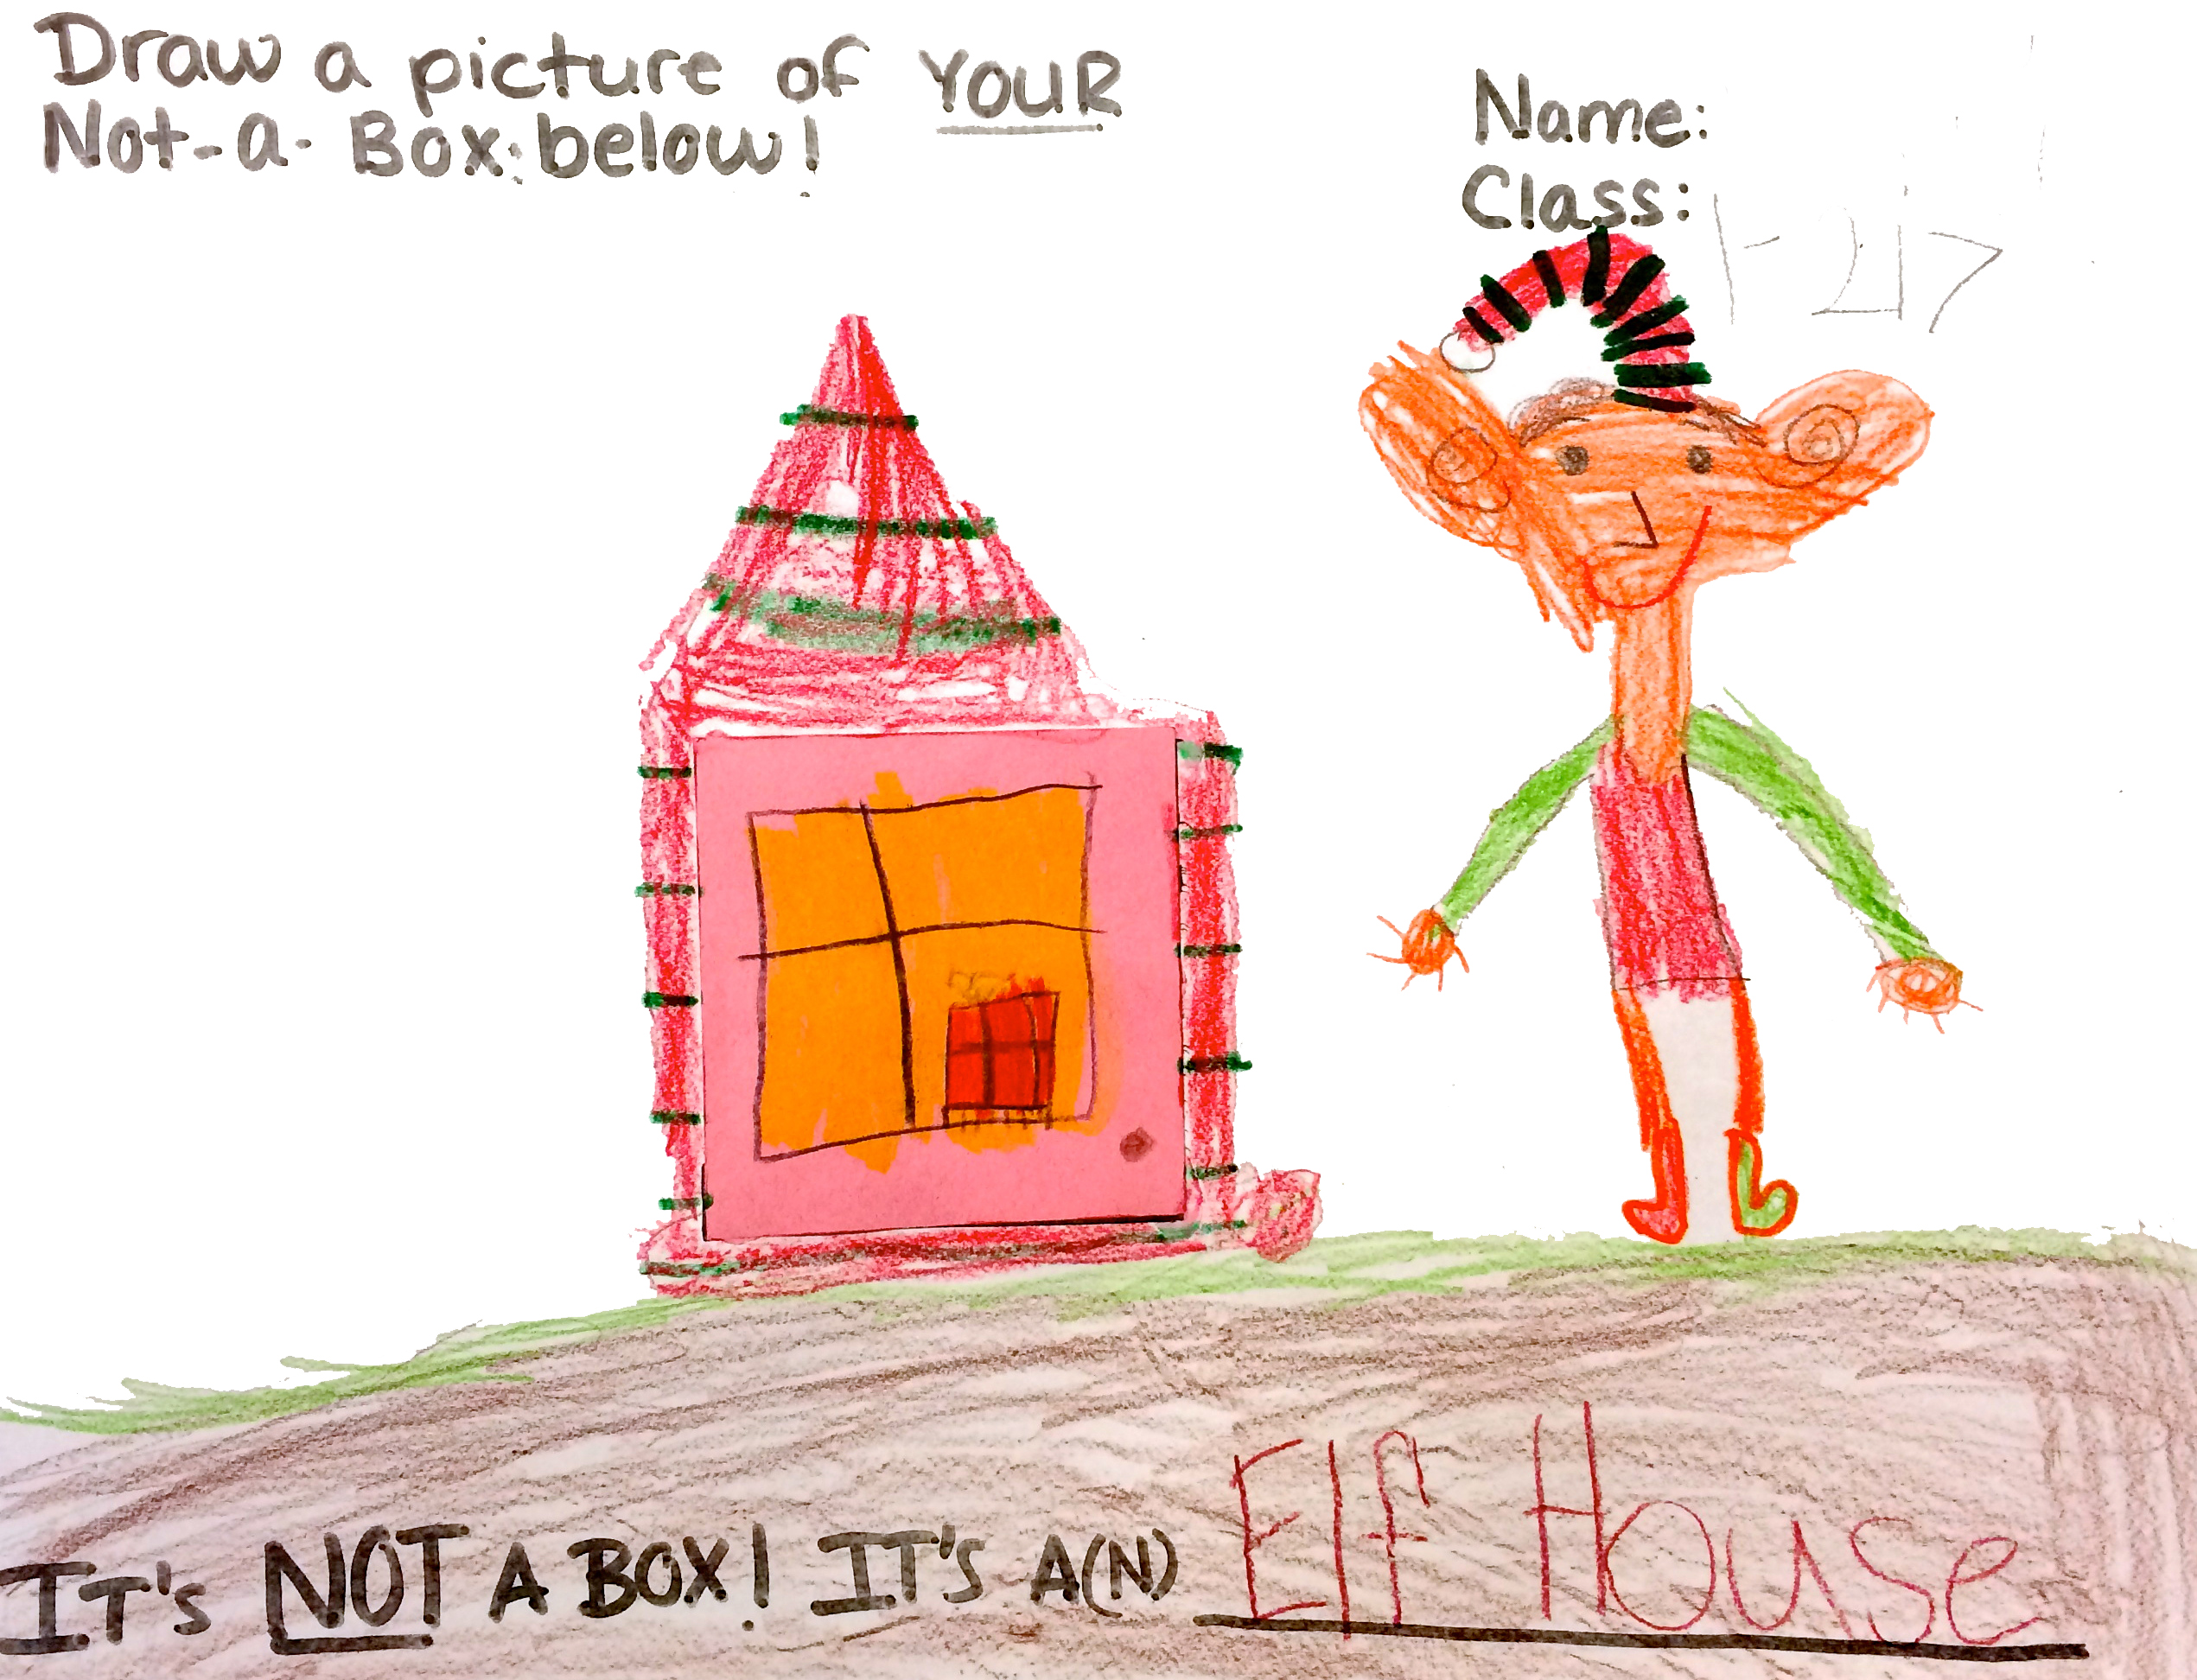 "Elf's House." This is Not A Box. (Grade: 3)